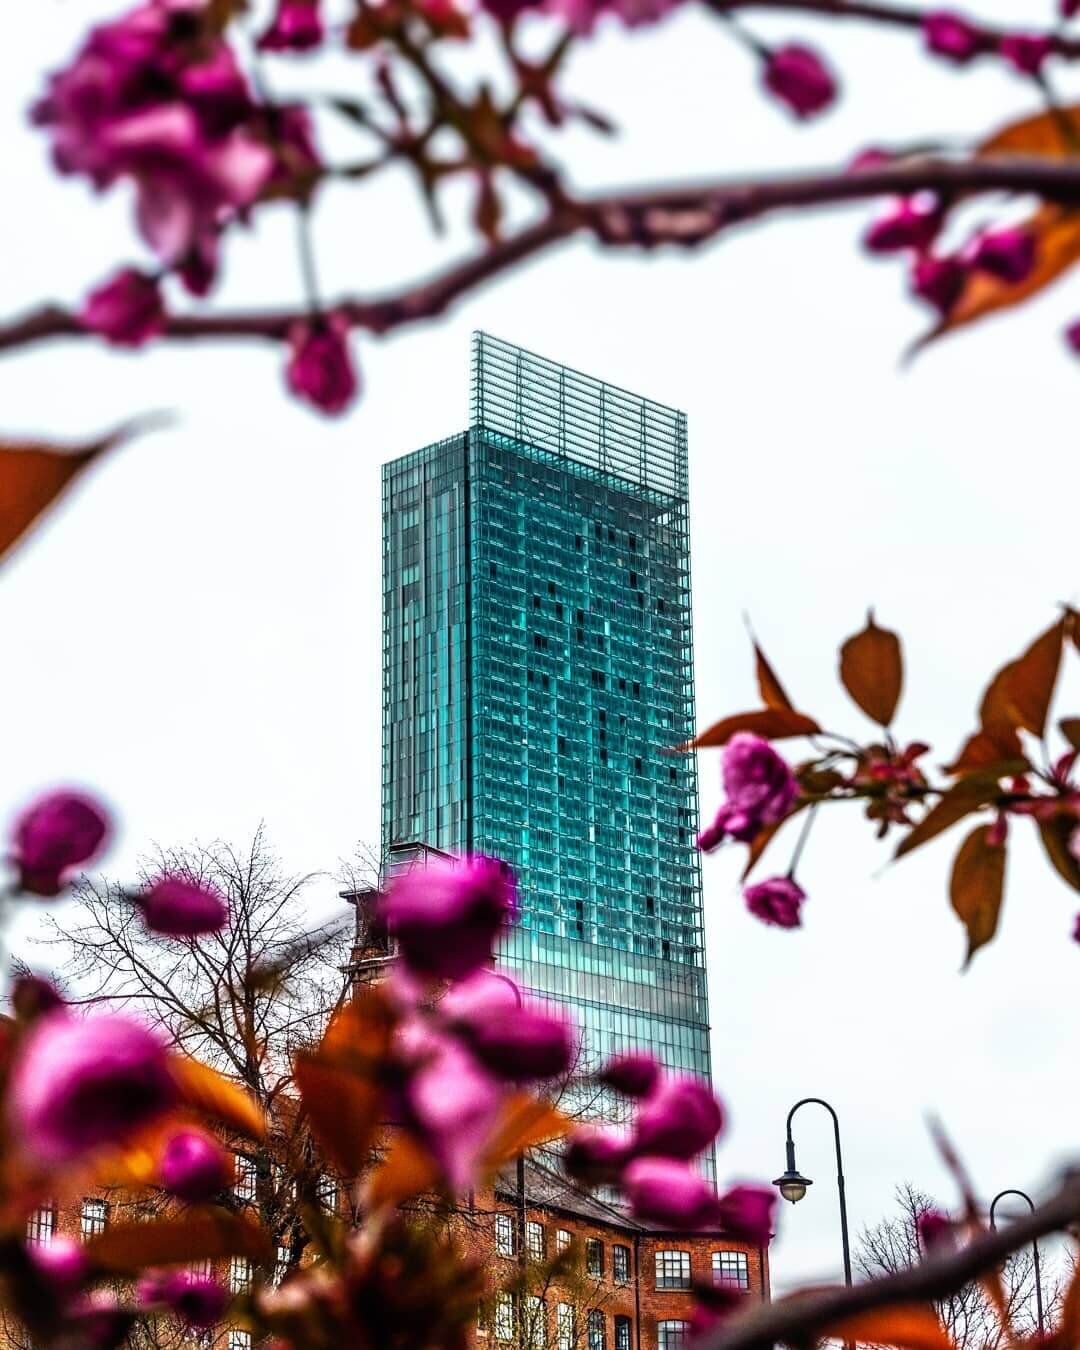 The Hilton Hotel in Manchester surrounded by blossoming flowers.jpg